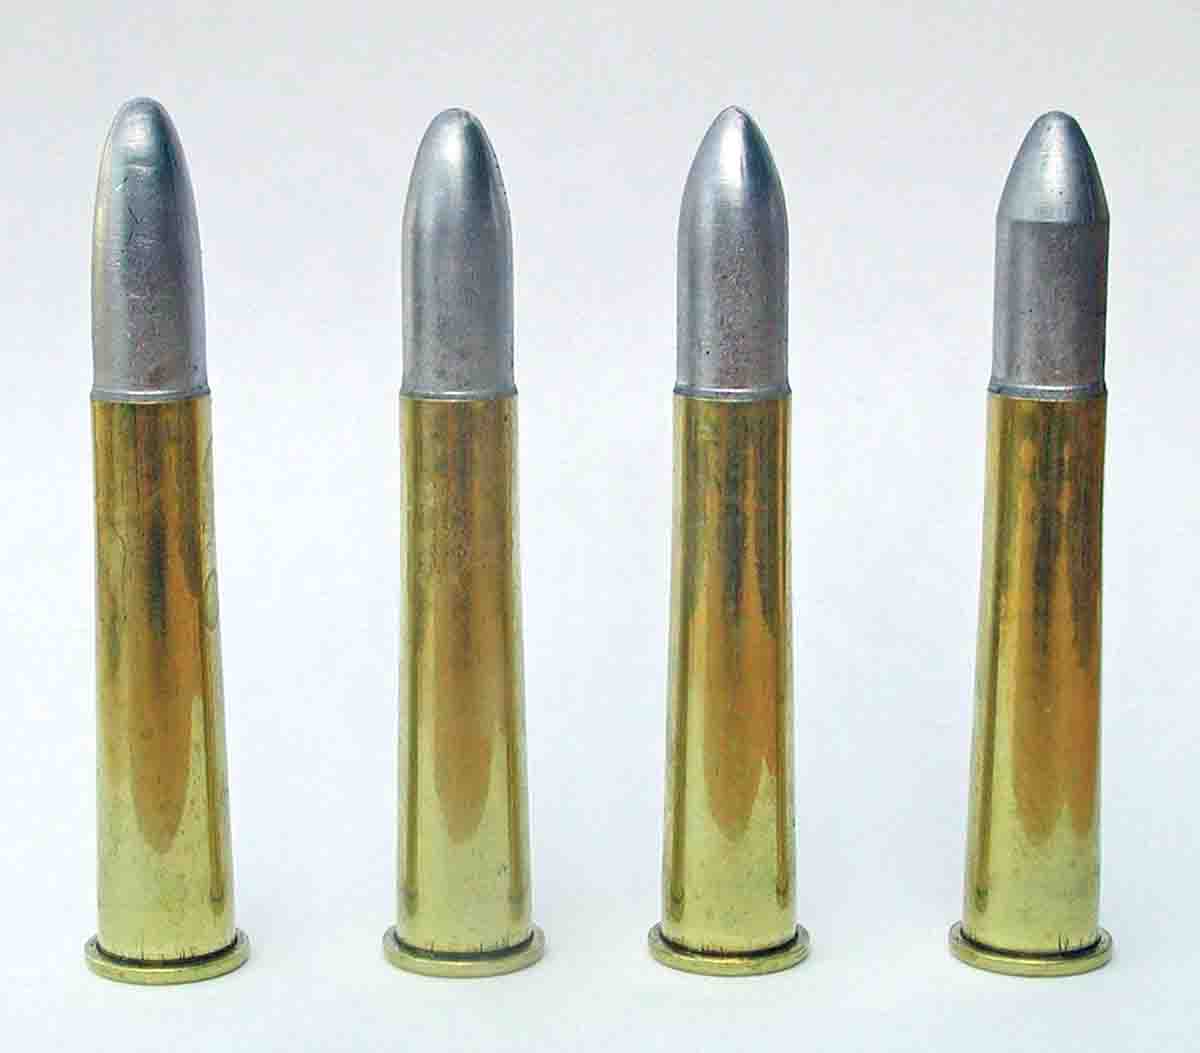 These .40-65 cartridges were used for testing in firing order (left to right): Dan Theodore elliptical-nose with .200 long bore ride (.399), .800 of unsupported nose; New Postel with .460 long bore ride (.399); Pointed “Turkey Killer” with .430 long  bore ride (.399); “No Slump” with .580 long bore ride (.399).